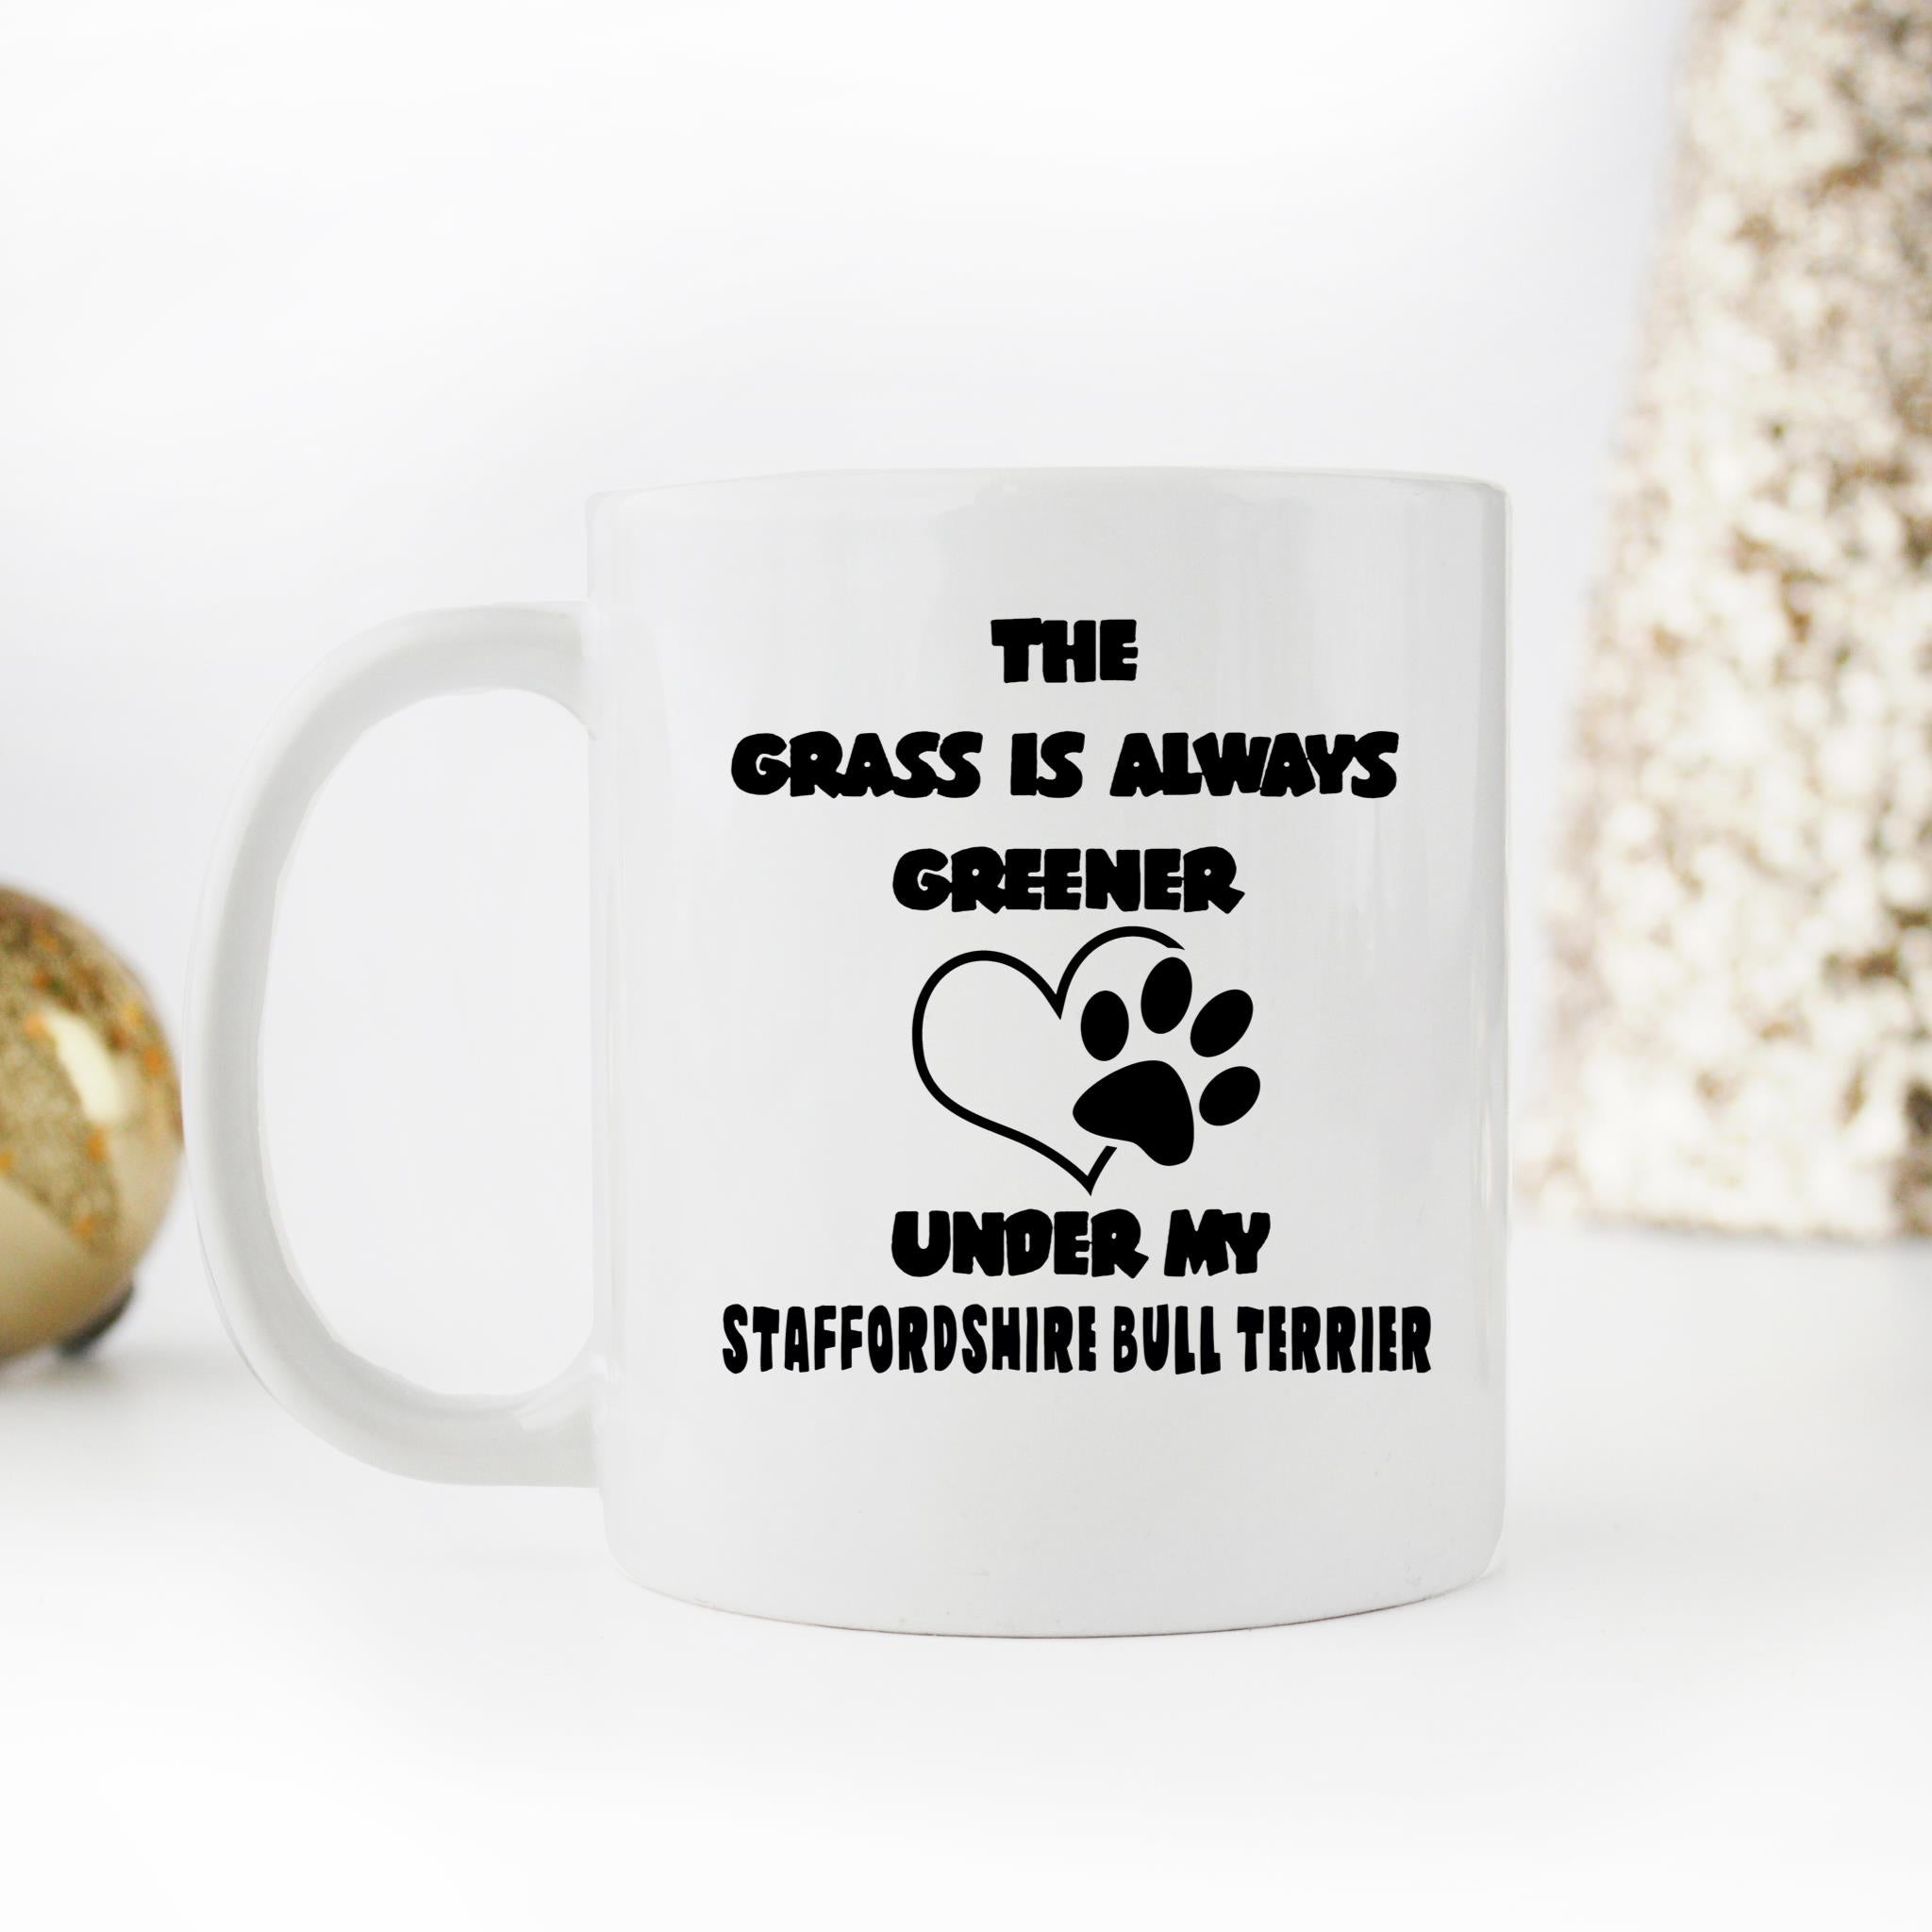 Skitons Funny Ceramic Novelty Coffee Mug The Grass Is Always Greener Under My Staffordshire Bull Terrier Dog Funny Sarcastic, Dog Lover L4cuh9M